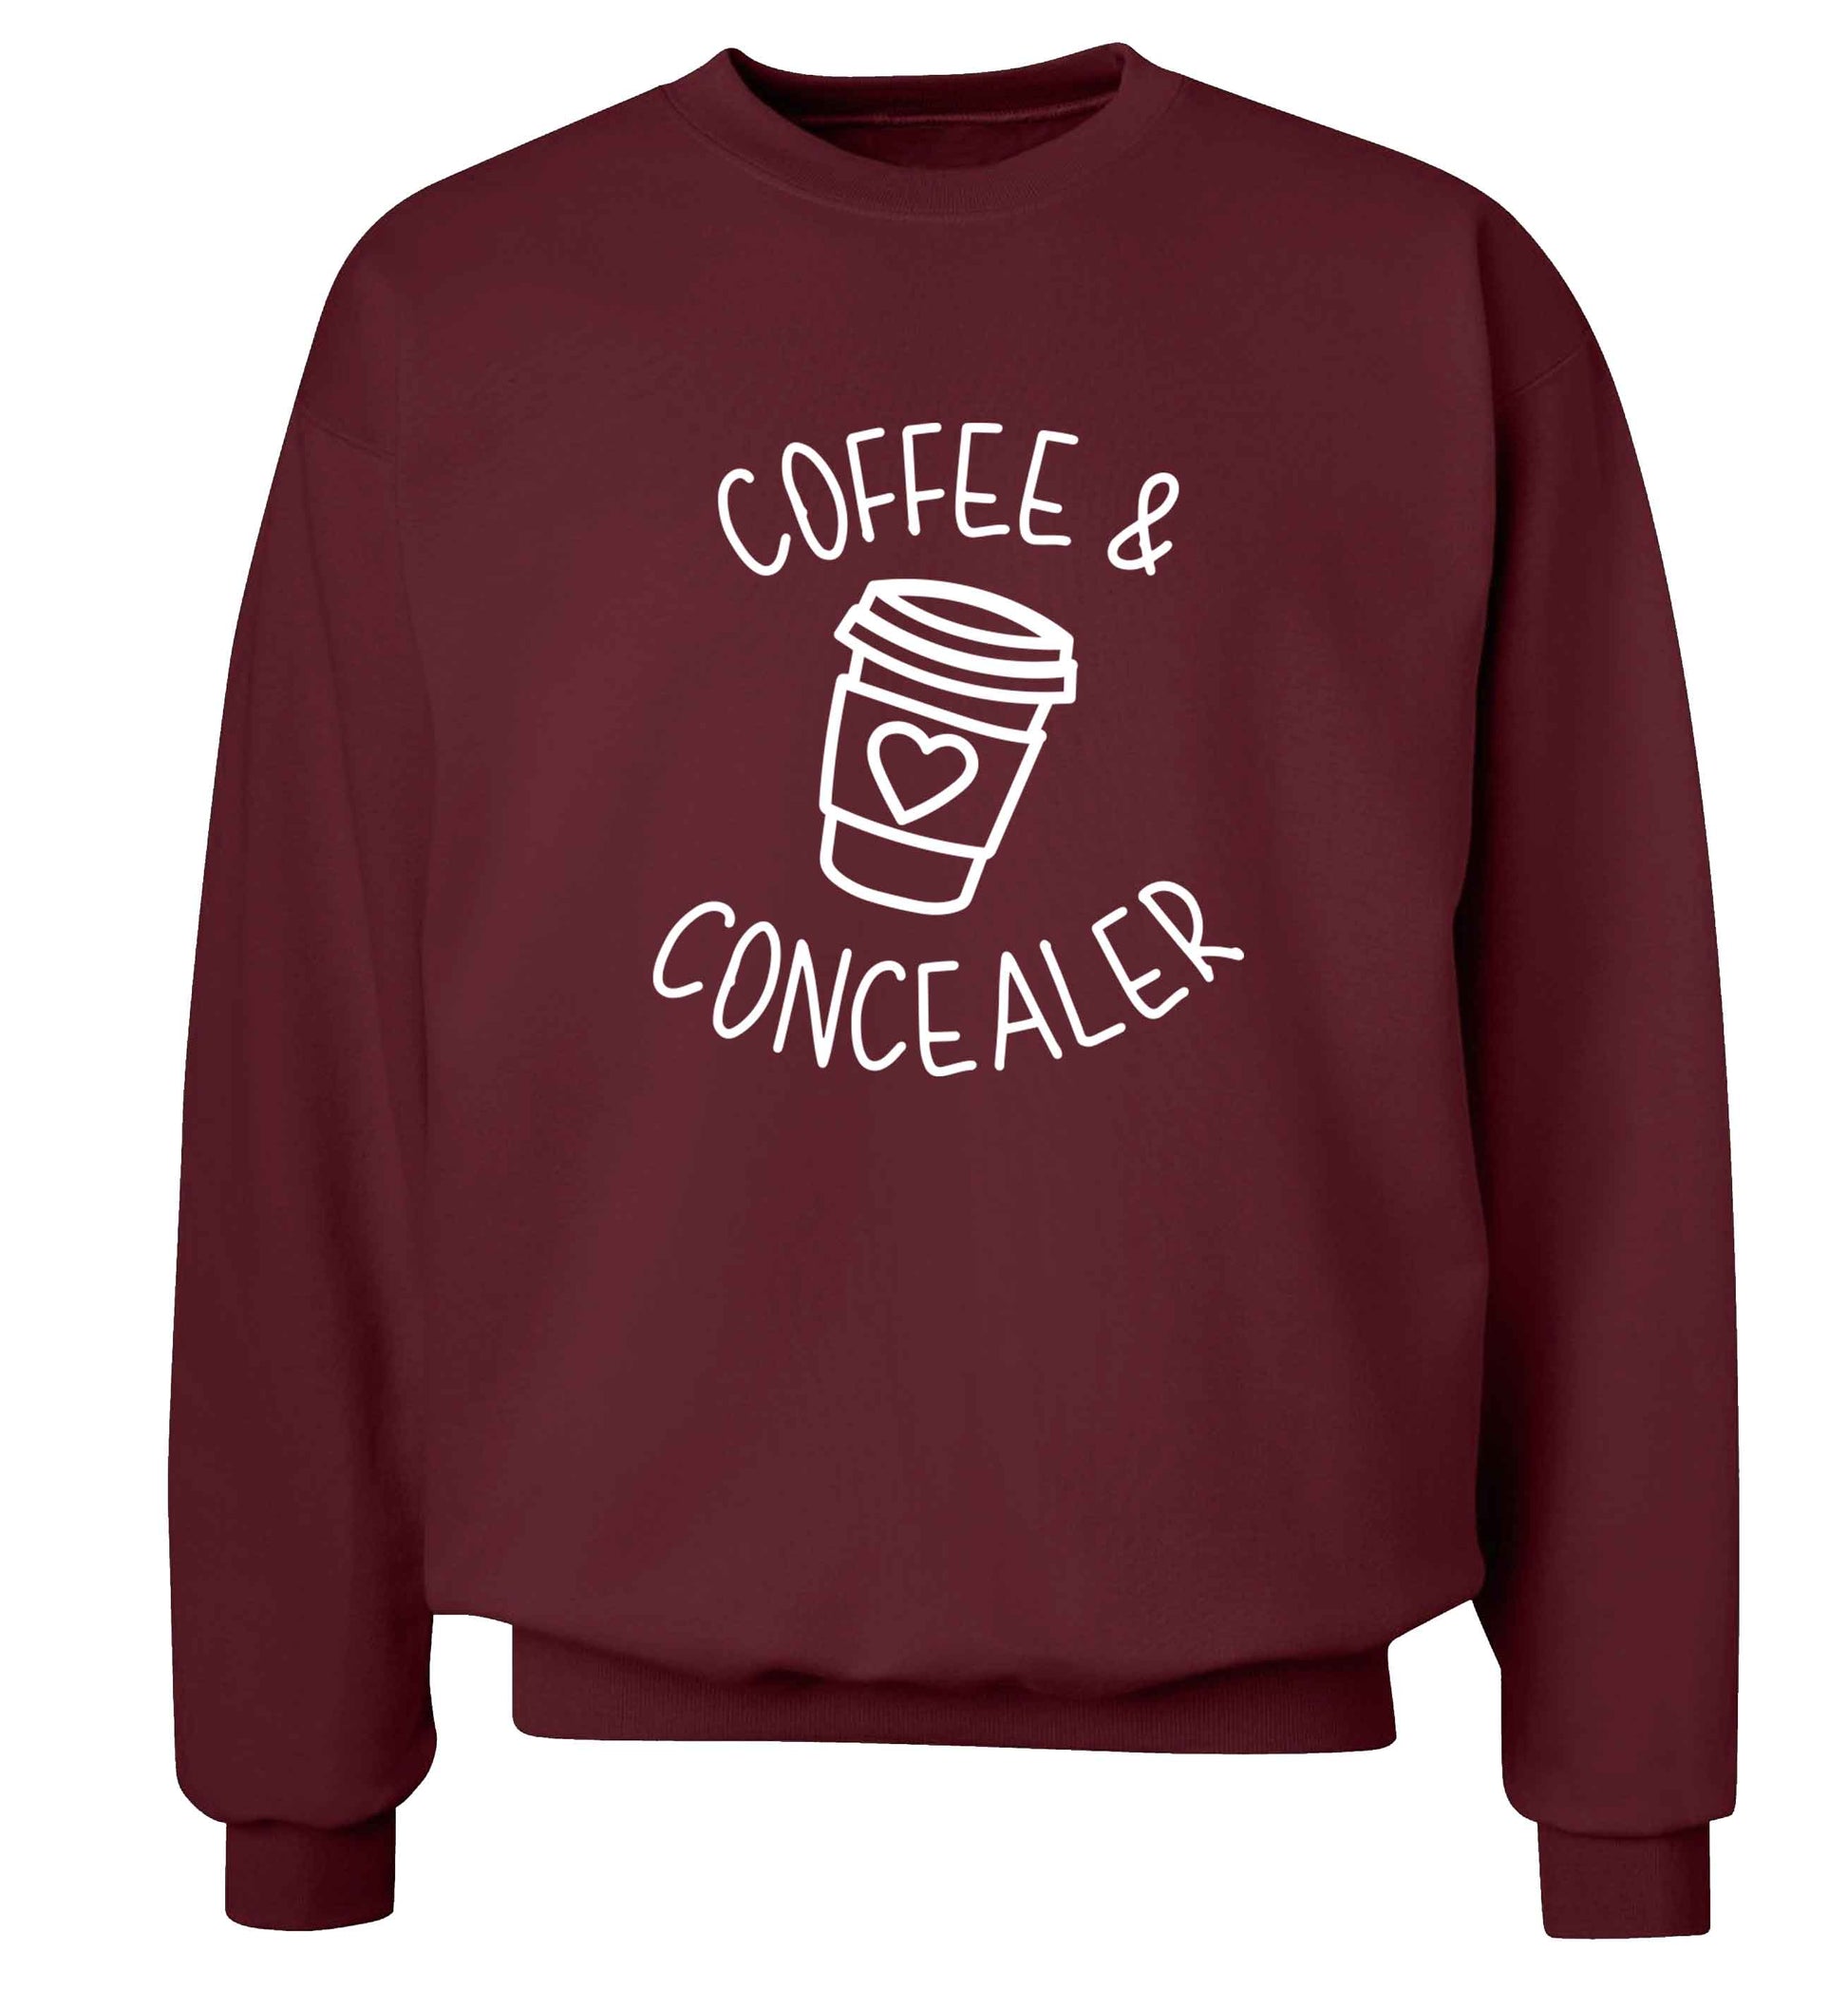 Coffee and concealer adult's unisex maroon sweater 2XL